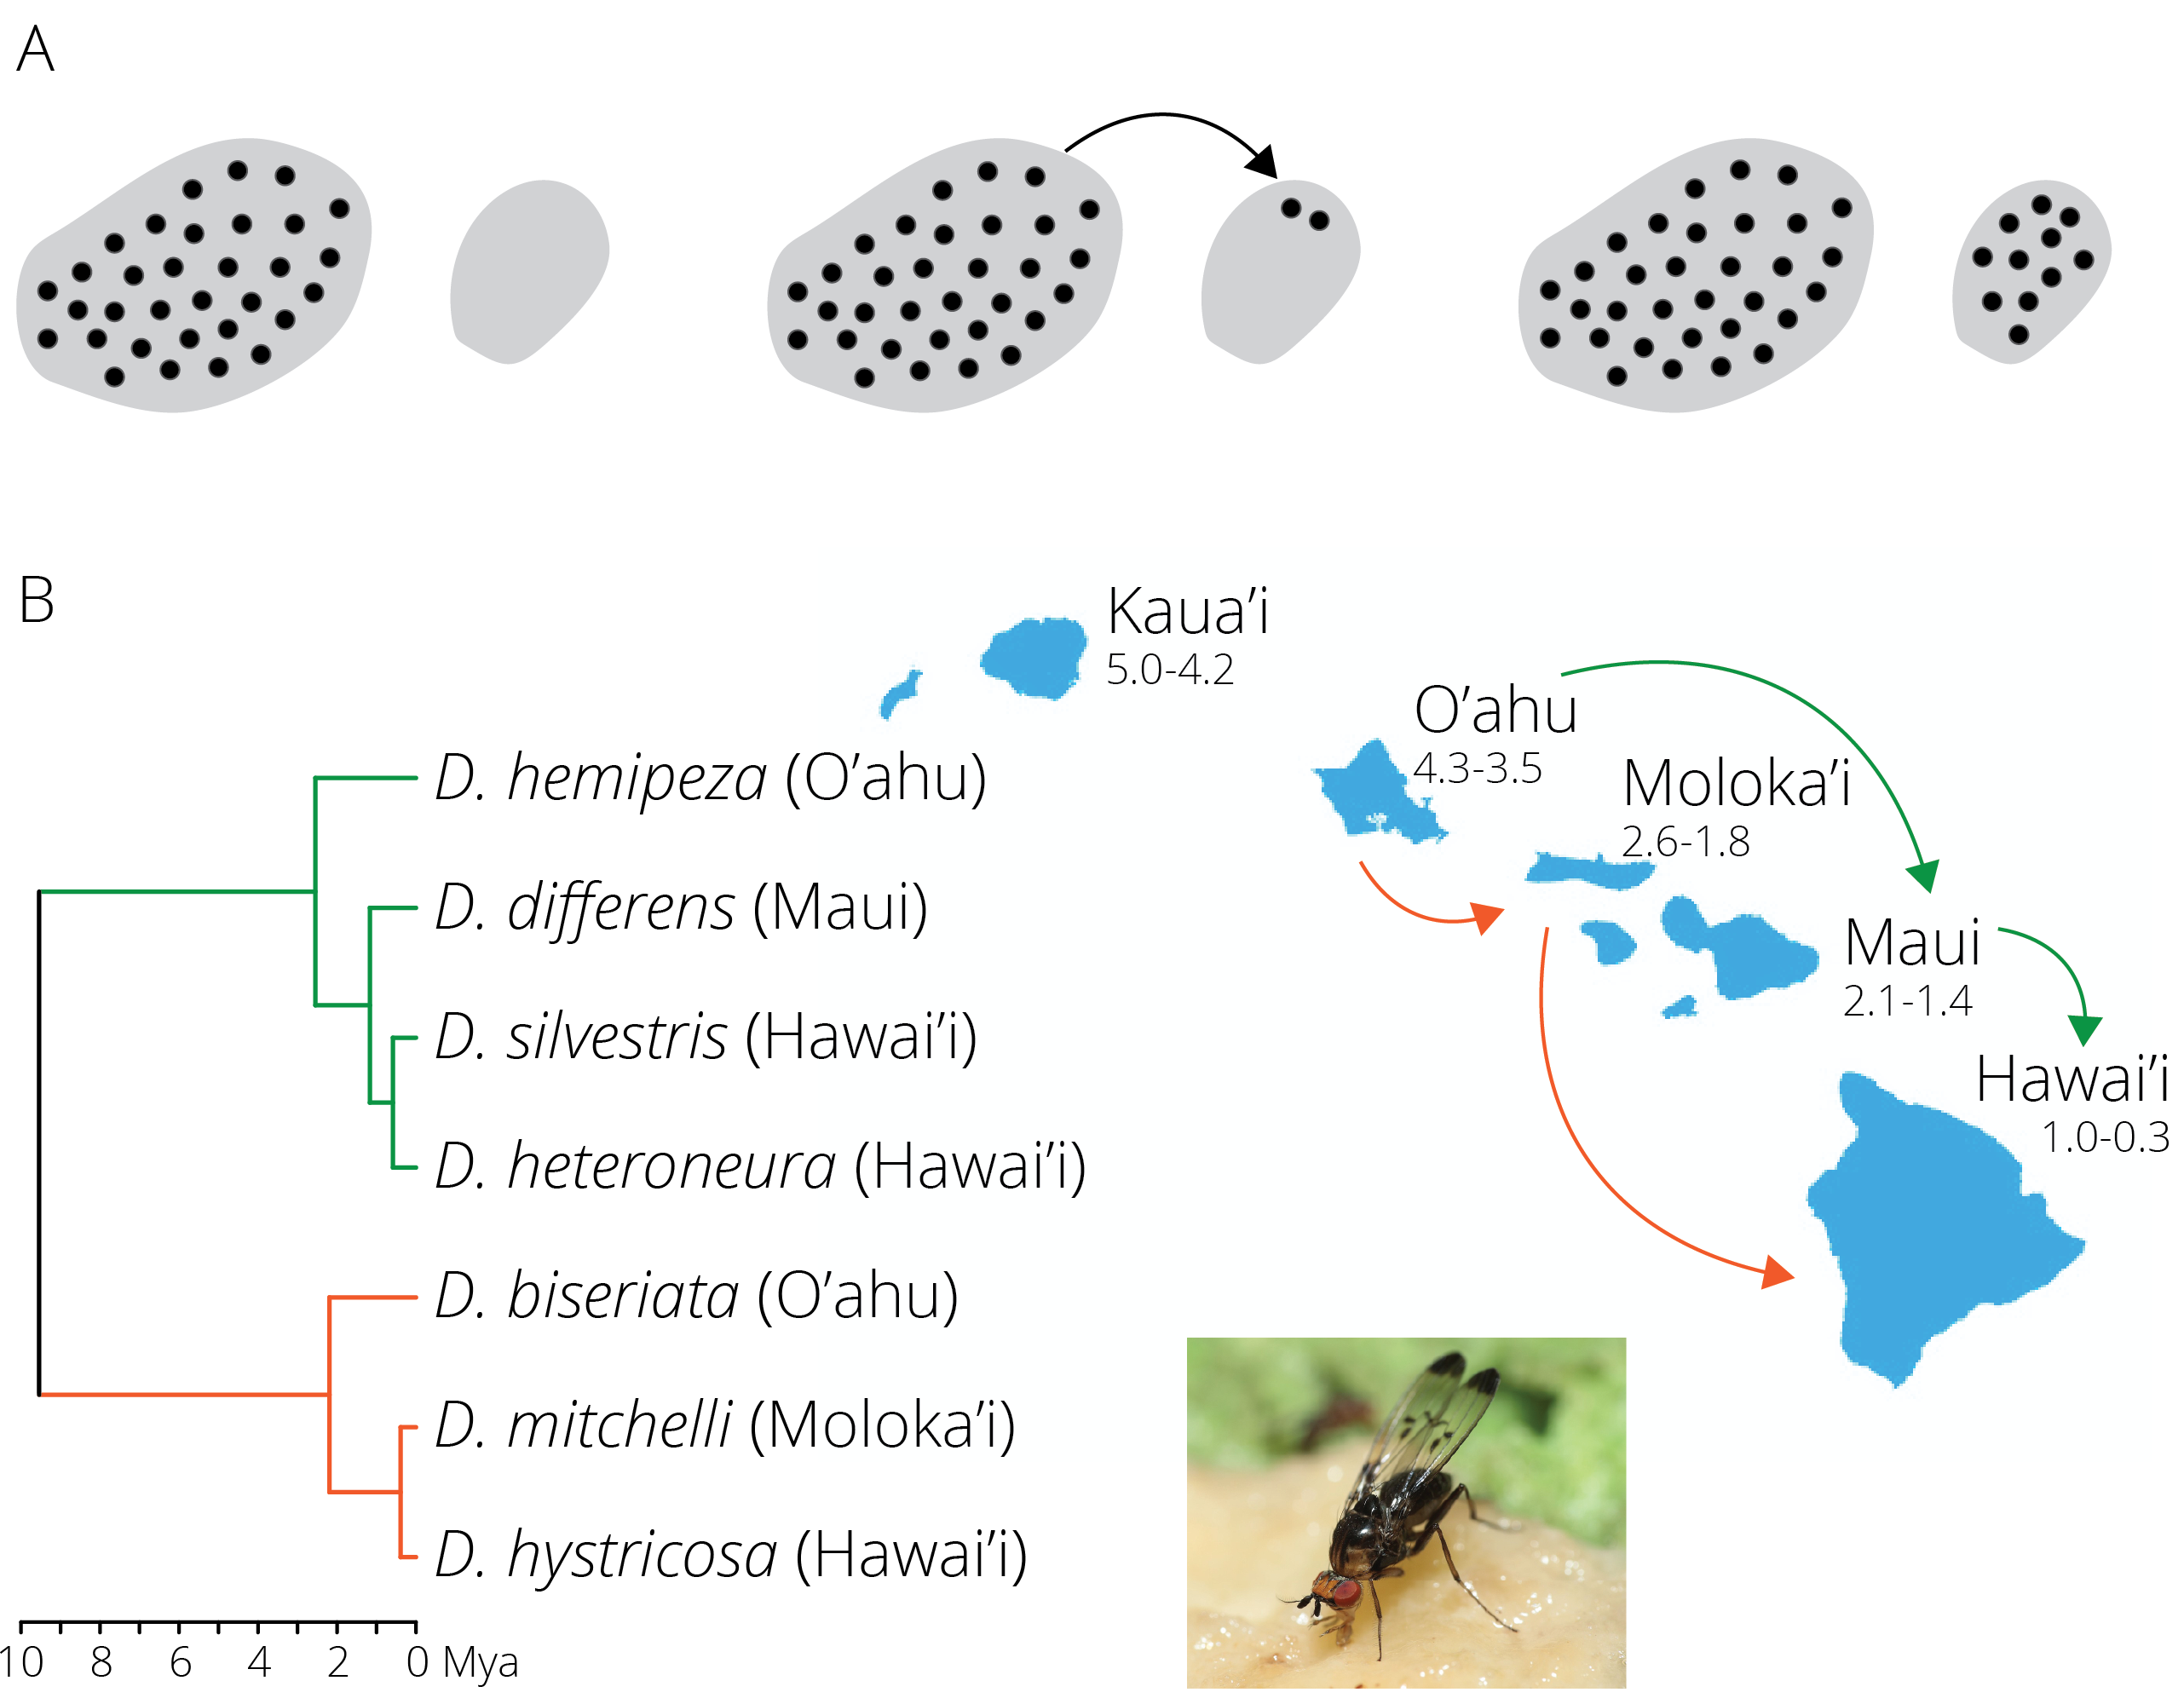 A. Dispersal is the colonization of a new habitat across a geographic barrier. B. Patterns of diversification in *Drosophila* fruitflies are consistent with dispersal. In two clades (green and orange), the sequence of species divergence corresponds to colonization of younger islands in the archipelago (adopted from Obbard et al. 2012). The inset photo shows *D. silvestris* (KarlM, [CC BY-SA 3.0](https://creativecommons.org/licenses/by-sa/3.0)).